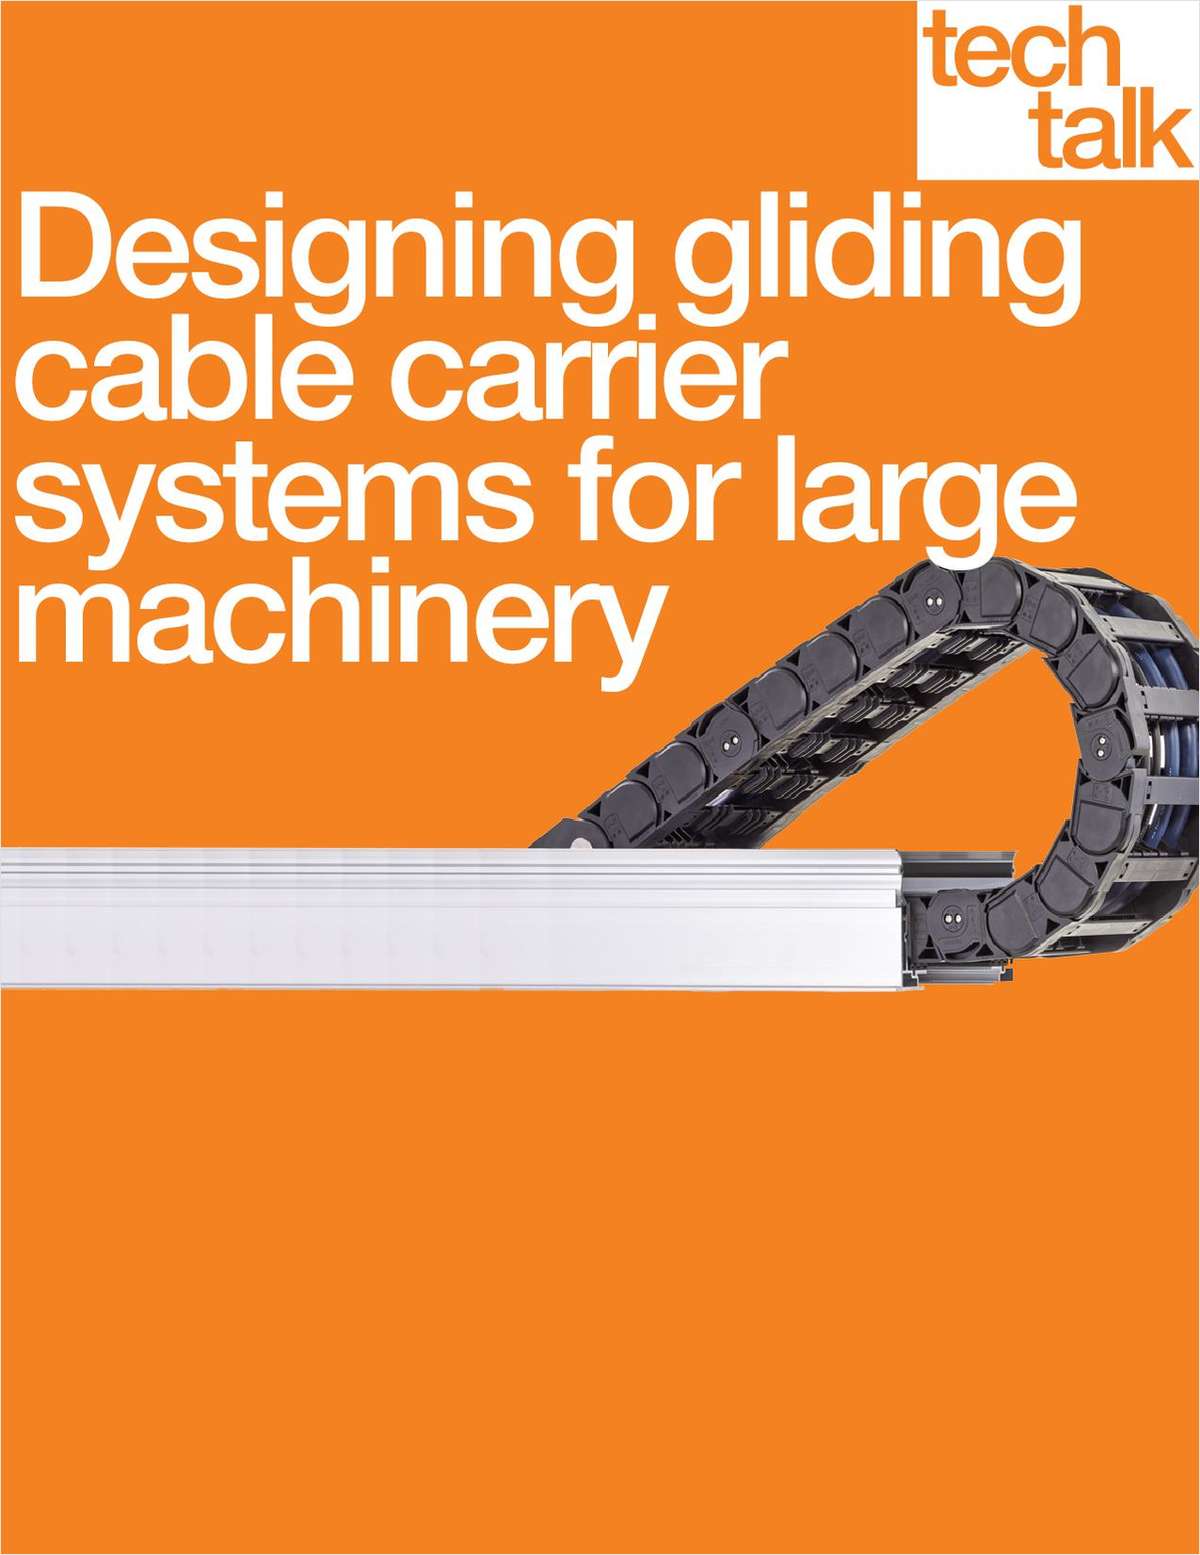 Designing gliding cable carrier systems for large machinery